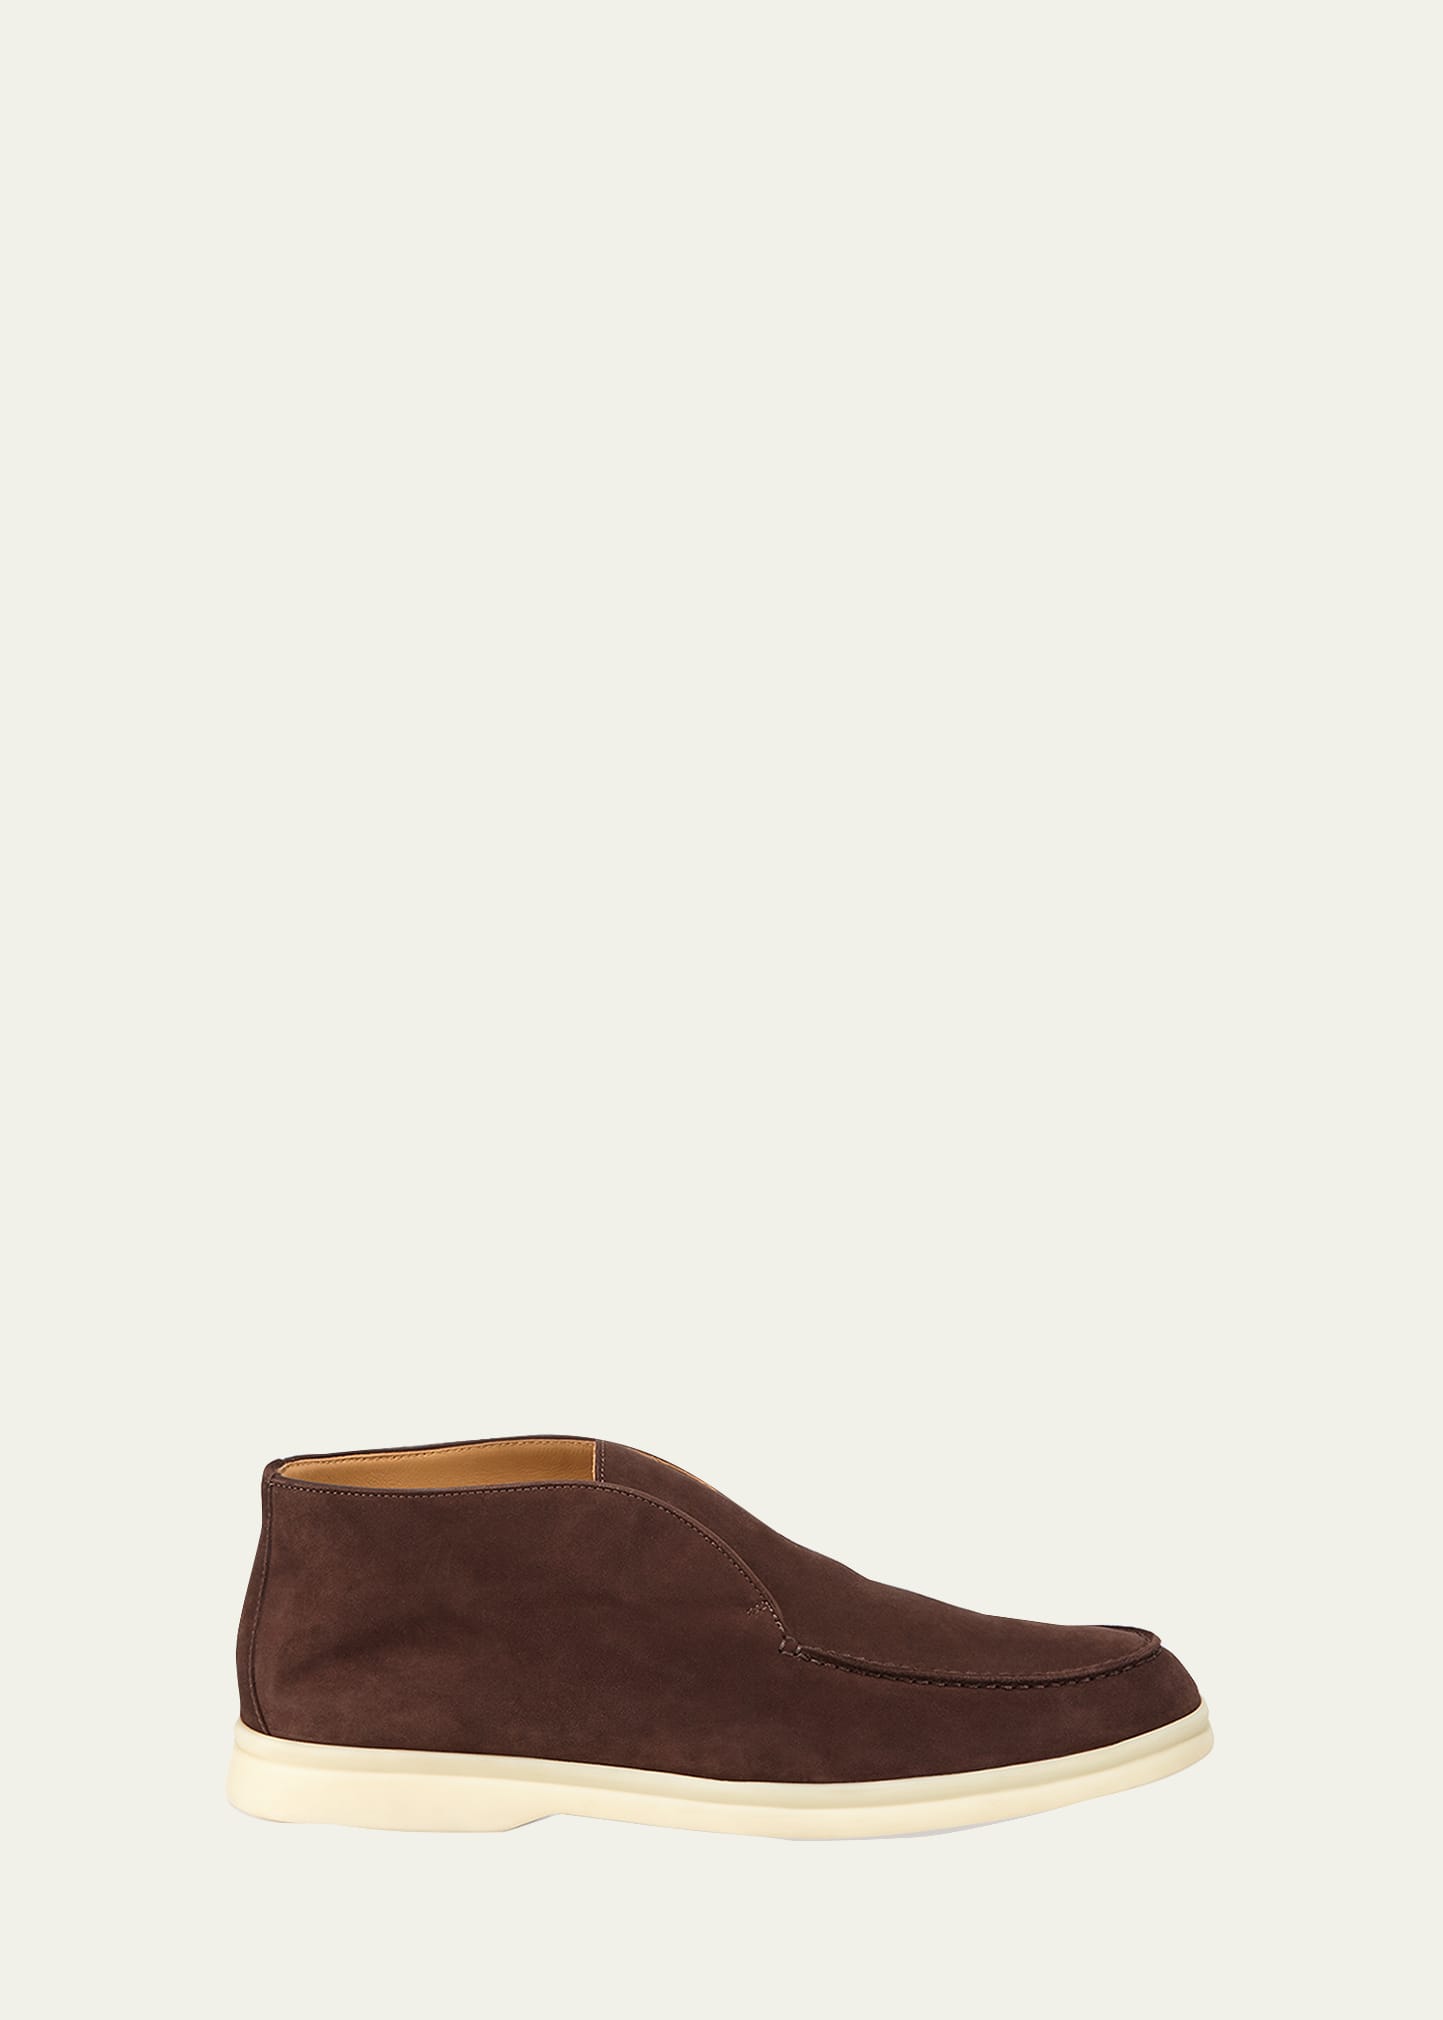 Loro Piana Open Walk Suede Ankle Boots In Chocolate